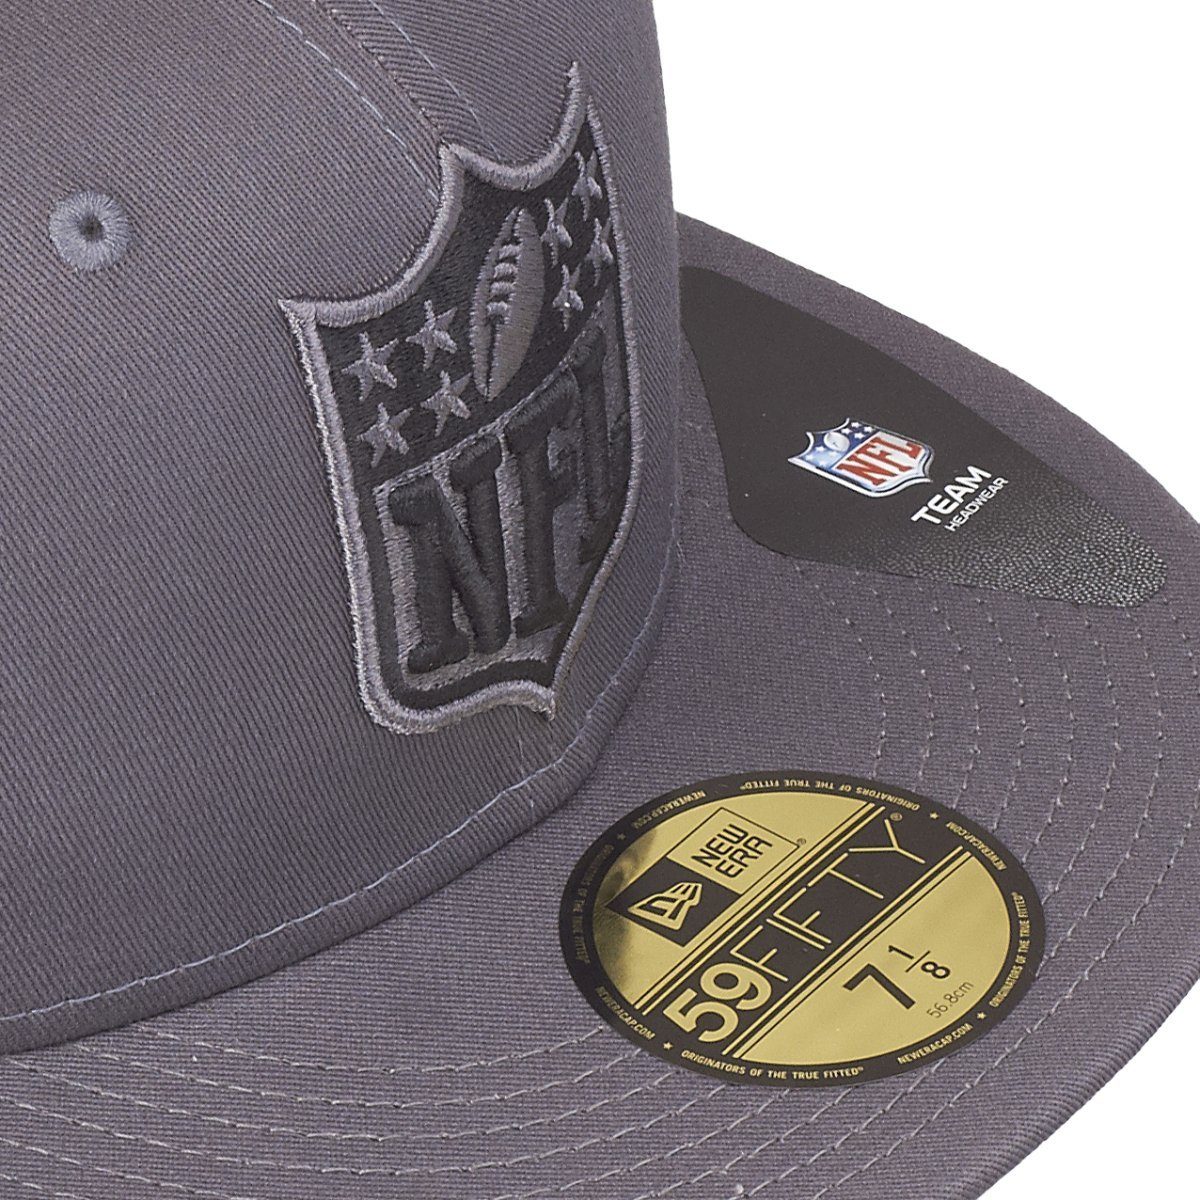 Logo NFL Cap Fitted New 59Fifty Era